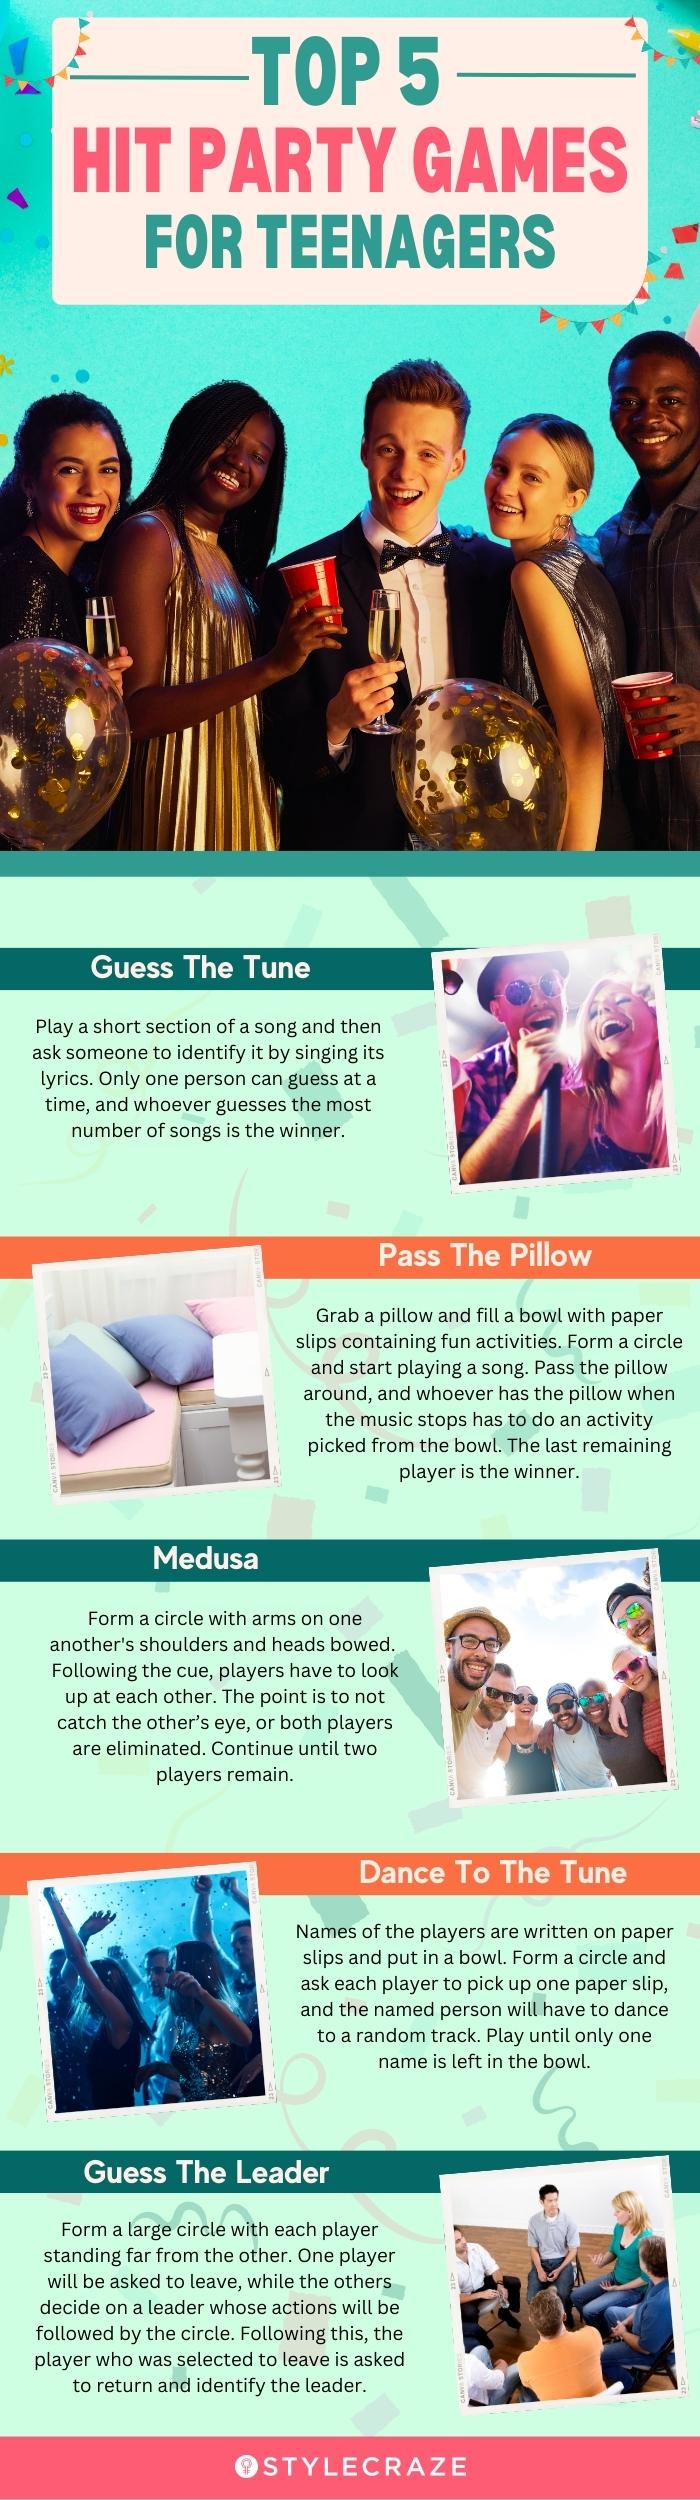 top 5 hit party games for teenagers (infographic)